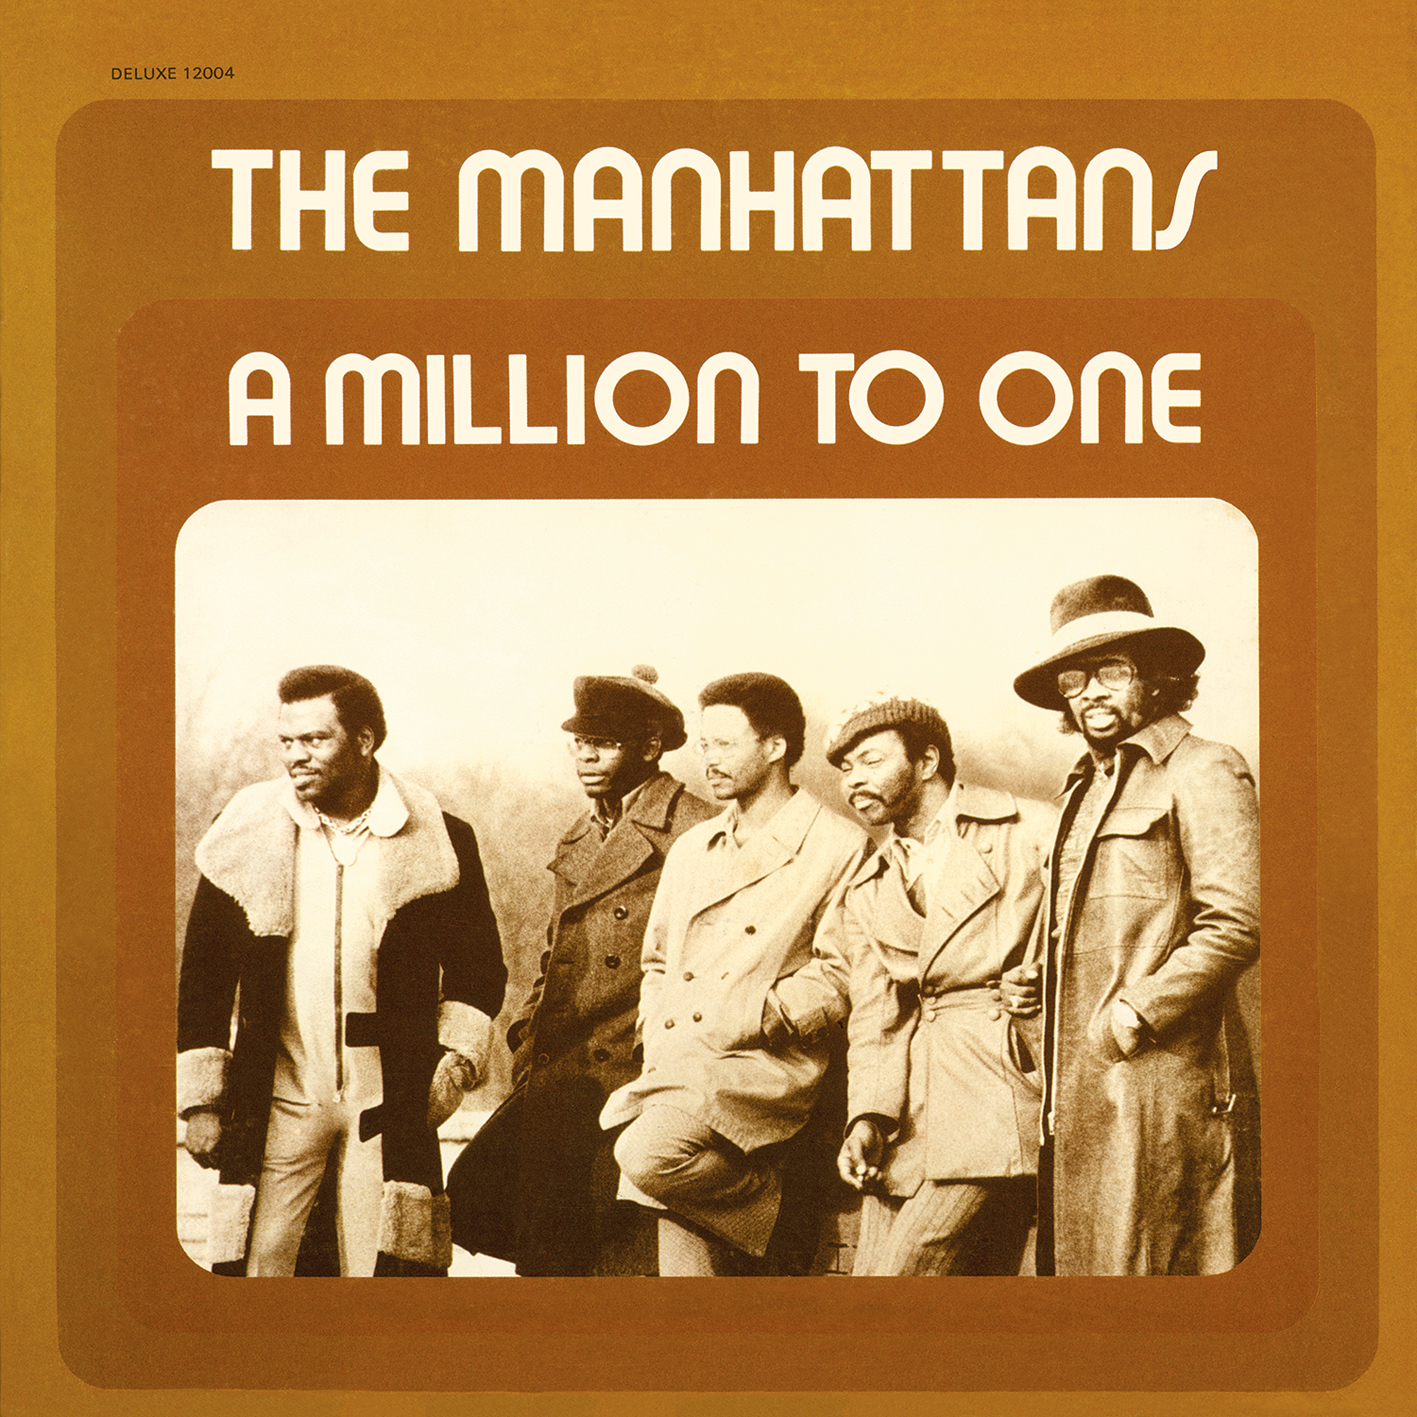 The Manhattans - A Million To One (1972/2016) [HDTracks FLAC 24bit/96kHz]